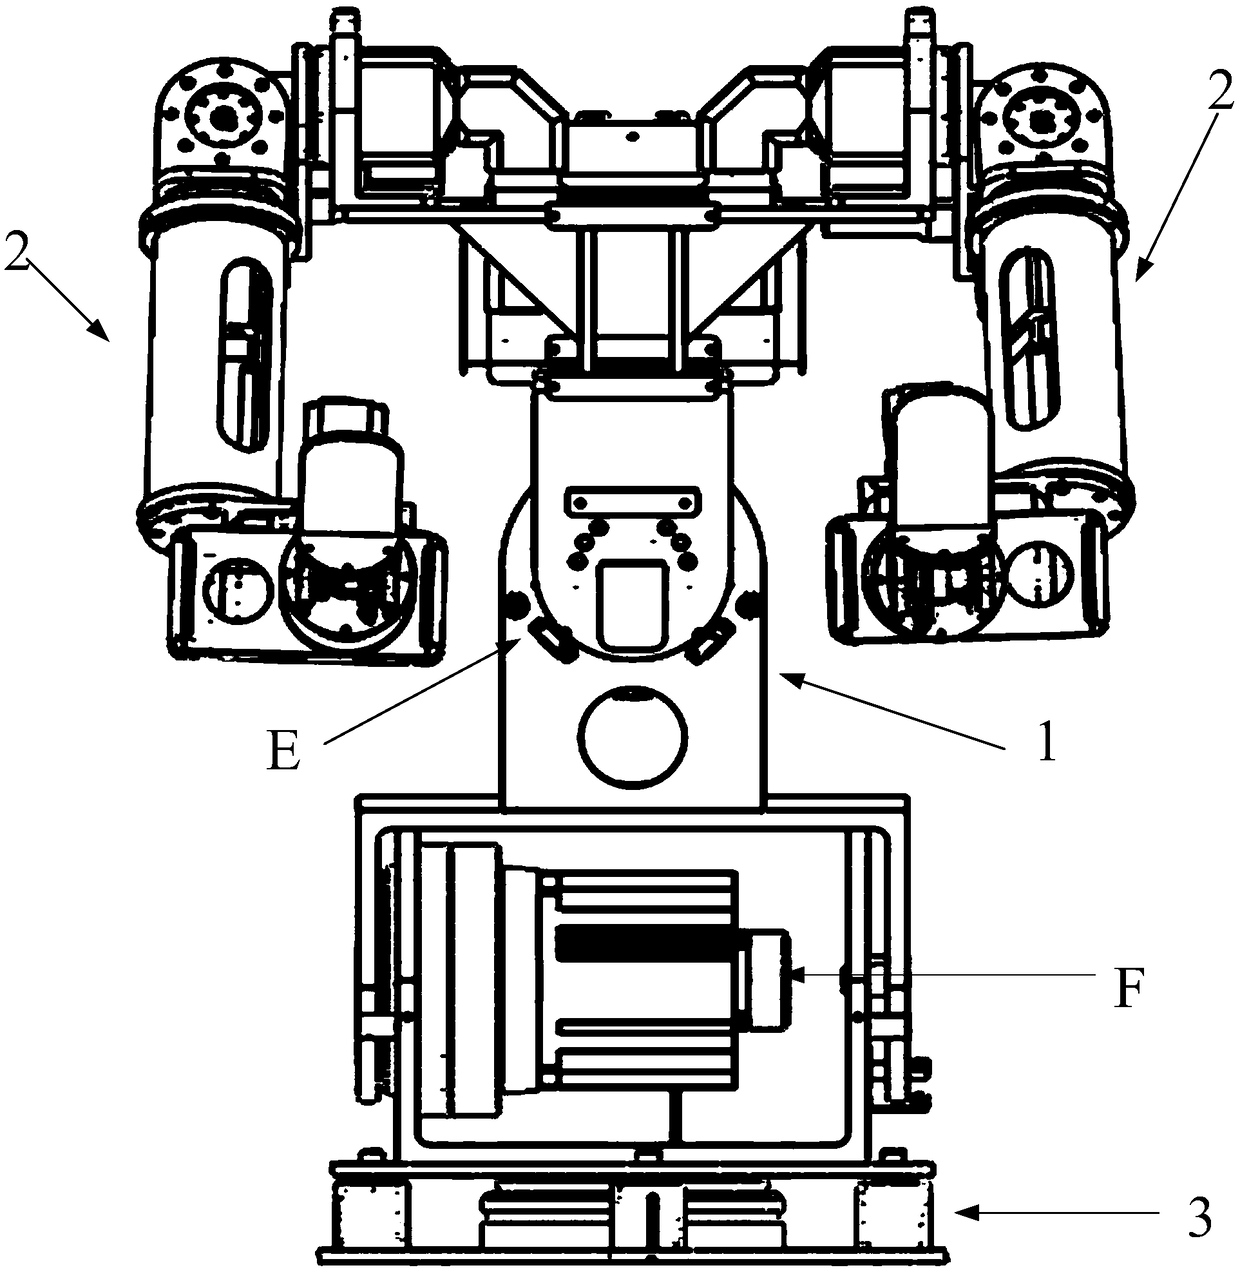 Ten-degrees-of-freedom double-mechanical-arm structure of old-age care robot